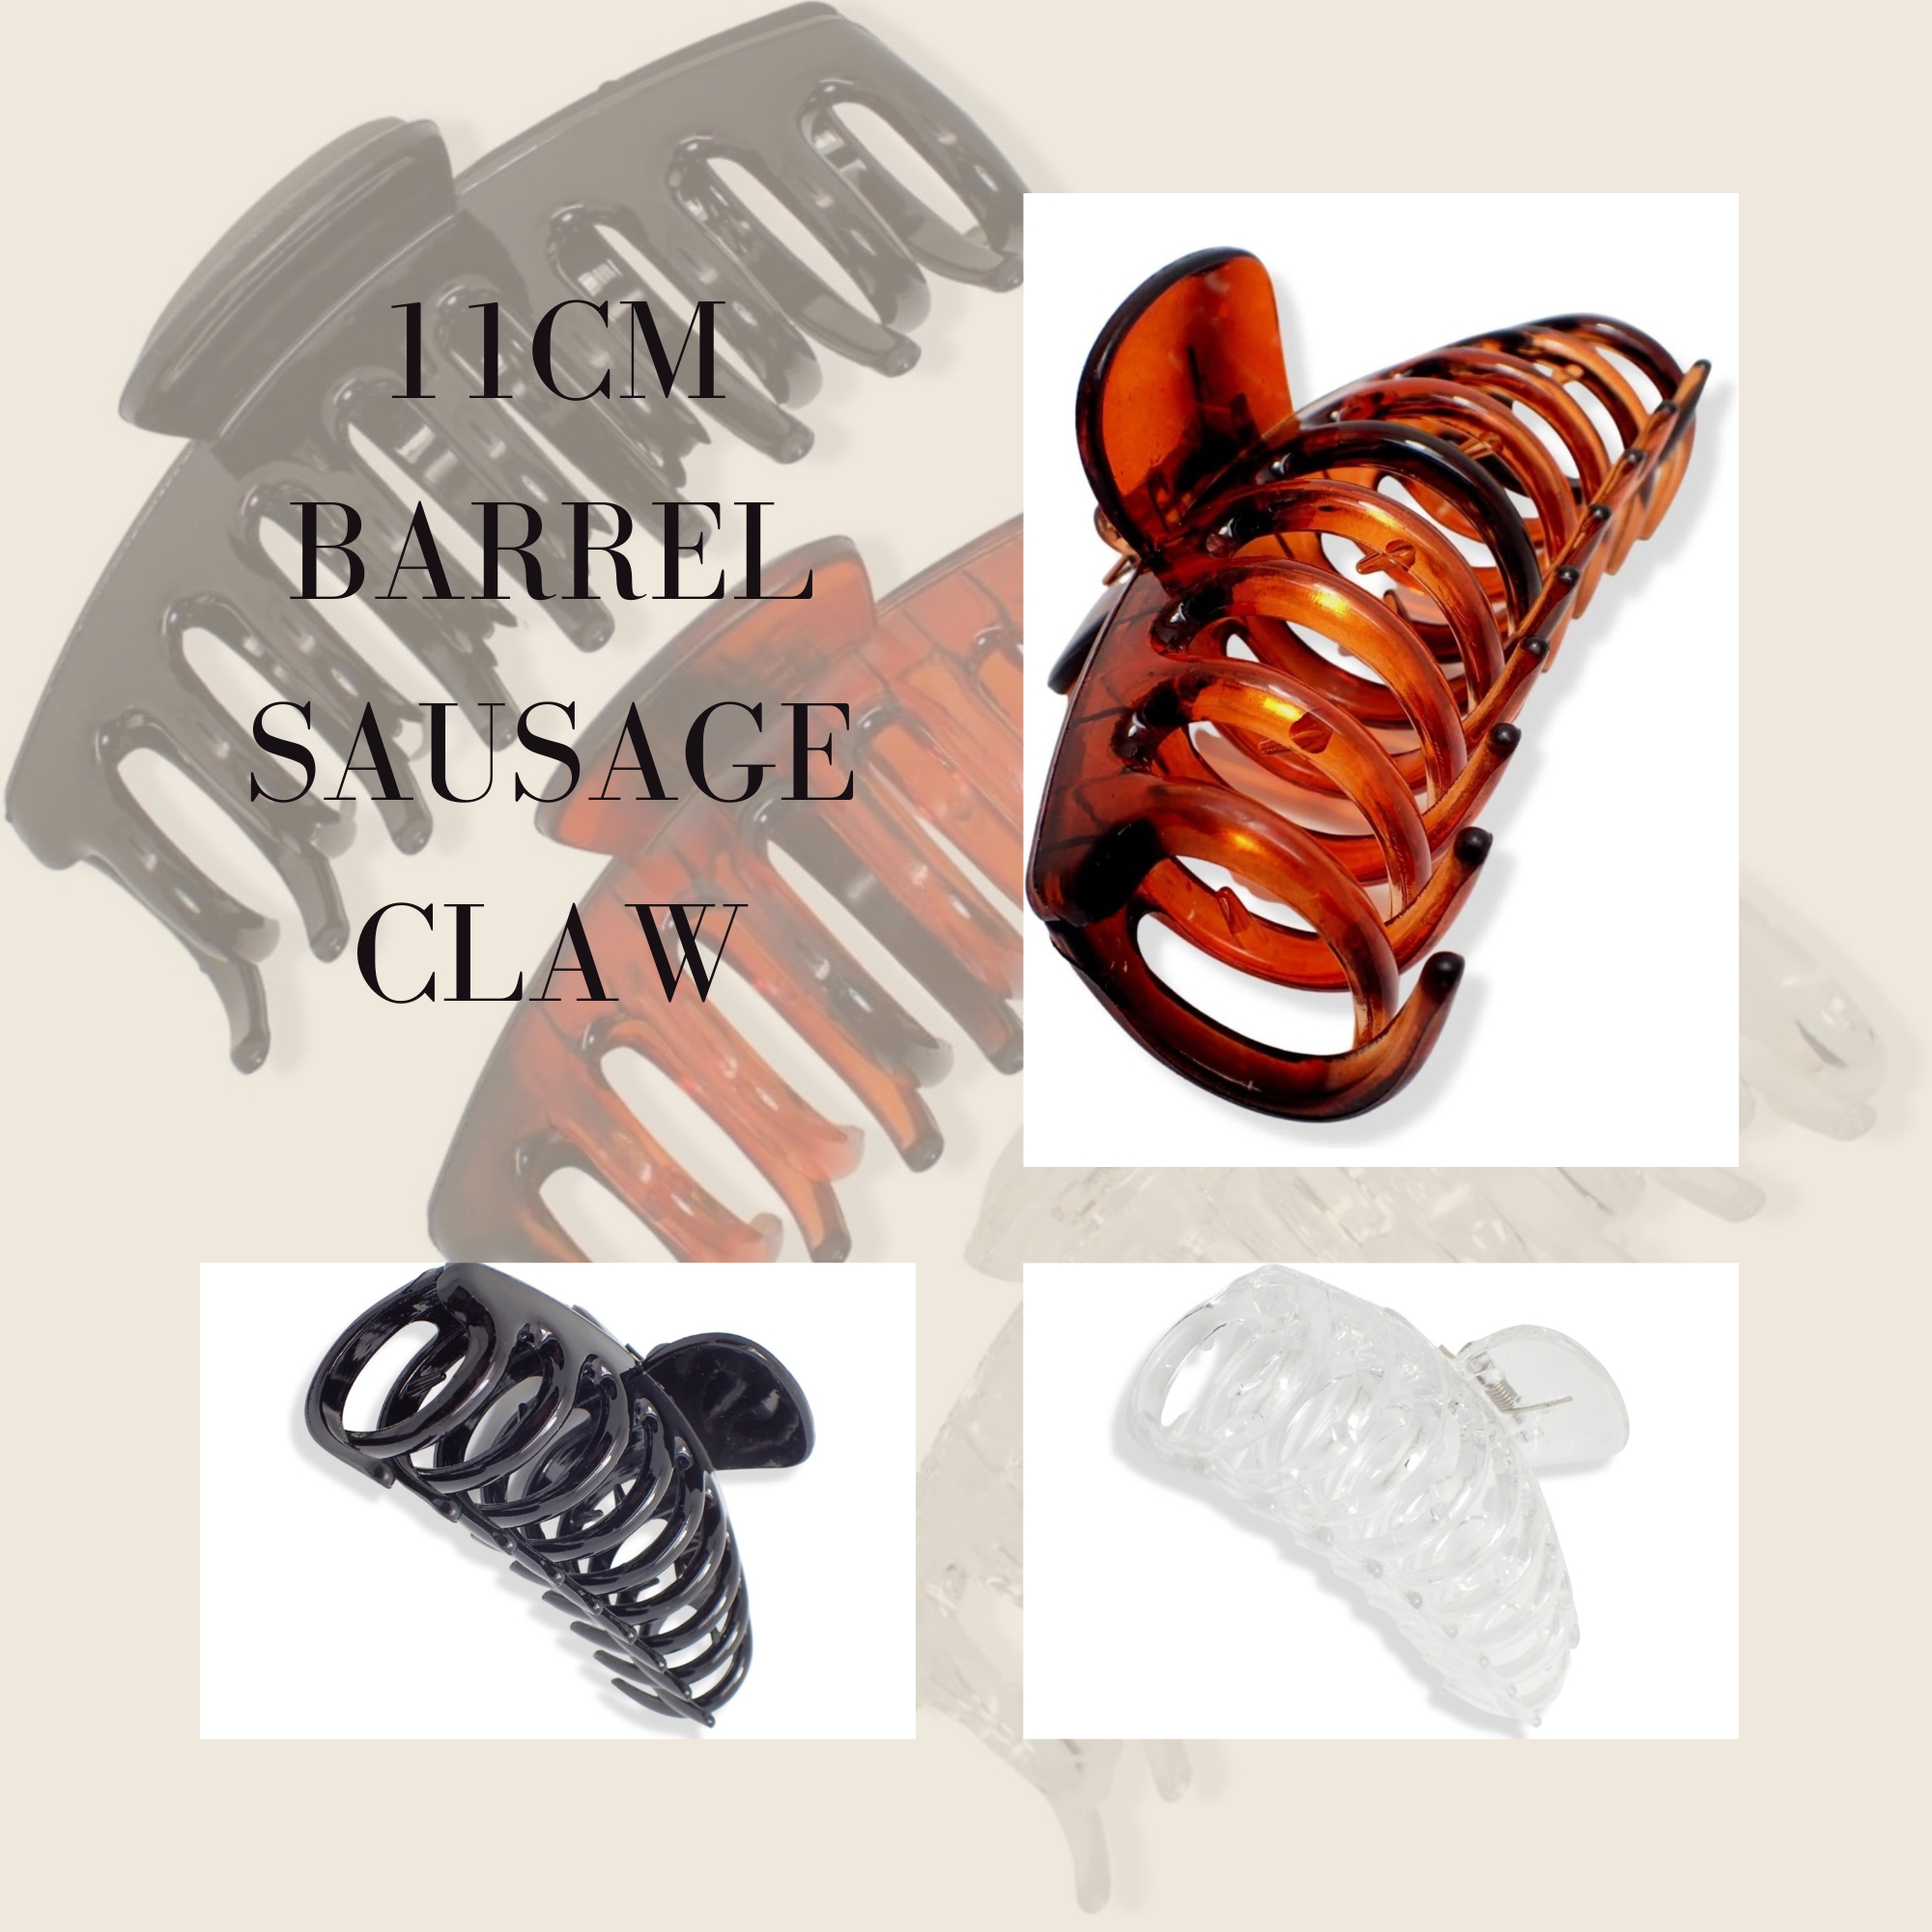 60 Sets of 3 Pieces (180 items) 11cm Barrel Sausage Claw in Tort, Black and Clear